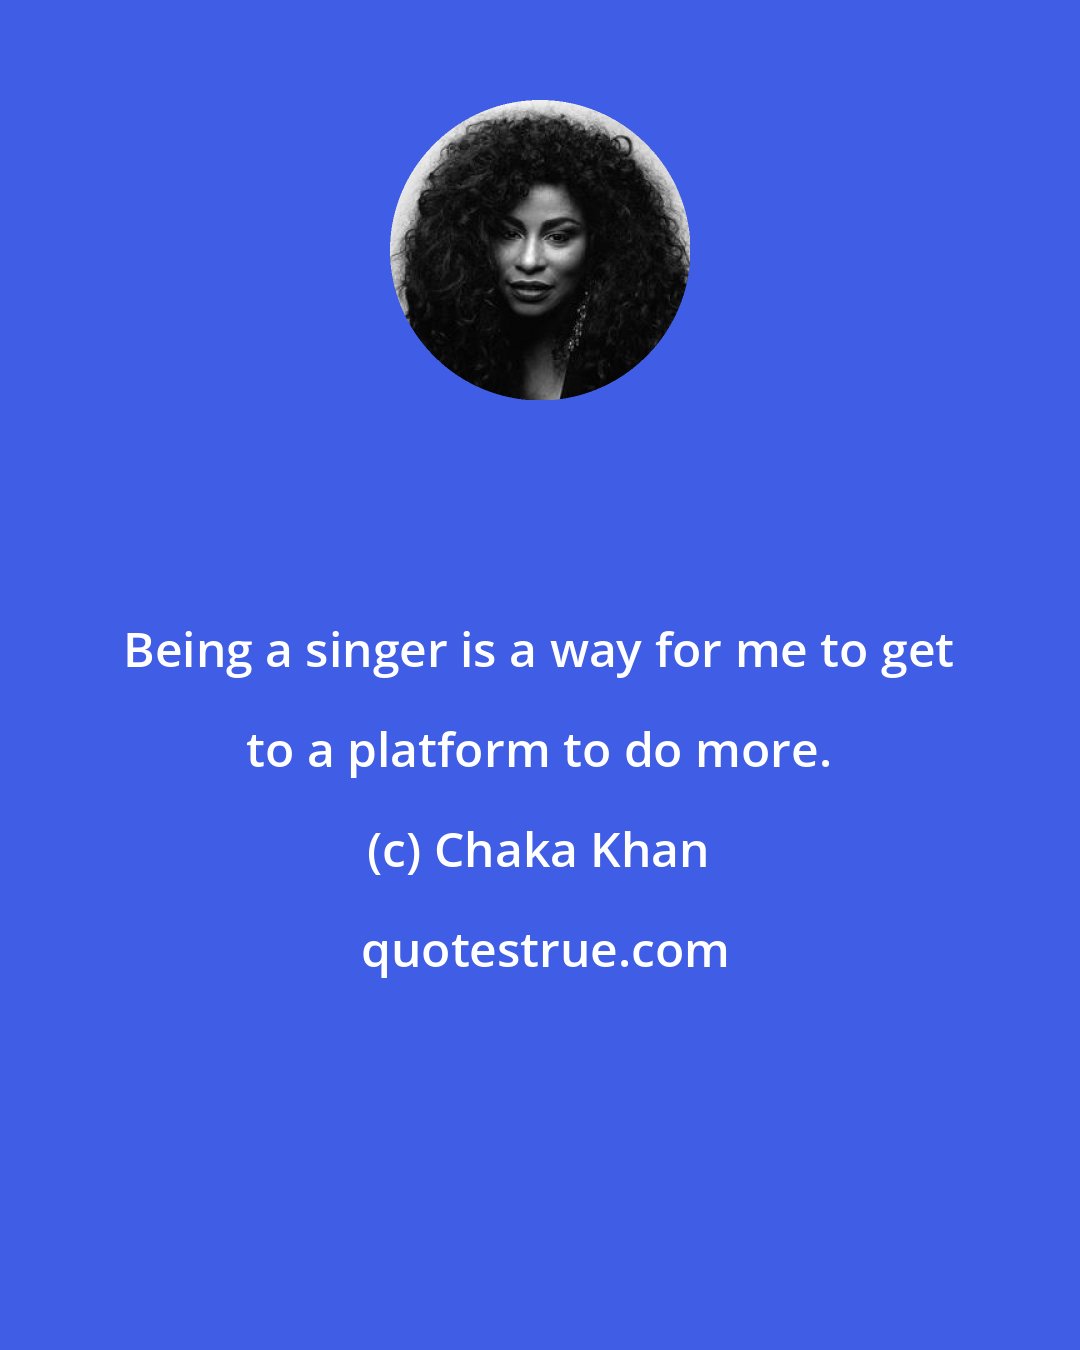 Chaka Khan: Being a singer is a way for me to get to a platform to do more.